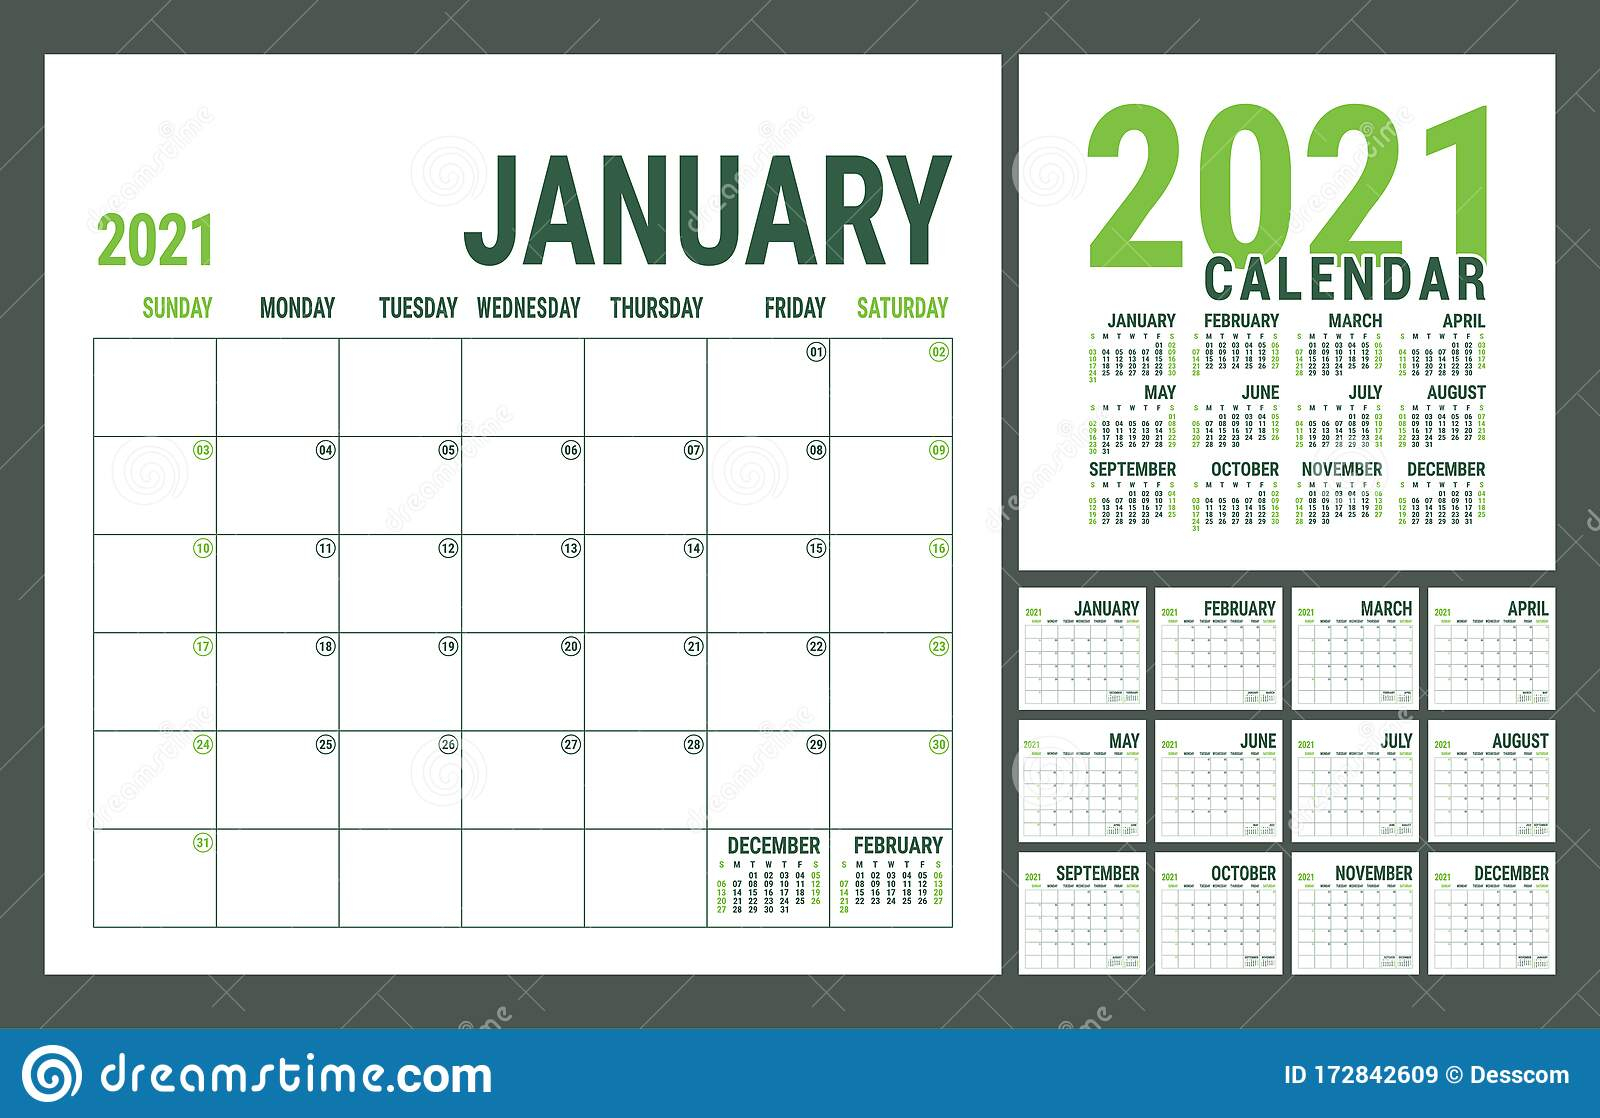 Calendar 2021. English Calender Template. Vector Square Grid. Office Business Planning. Creative